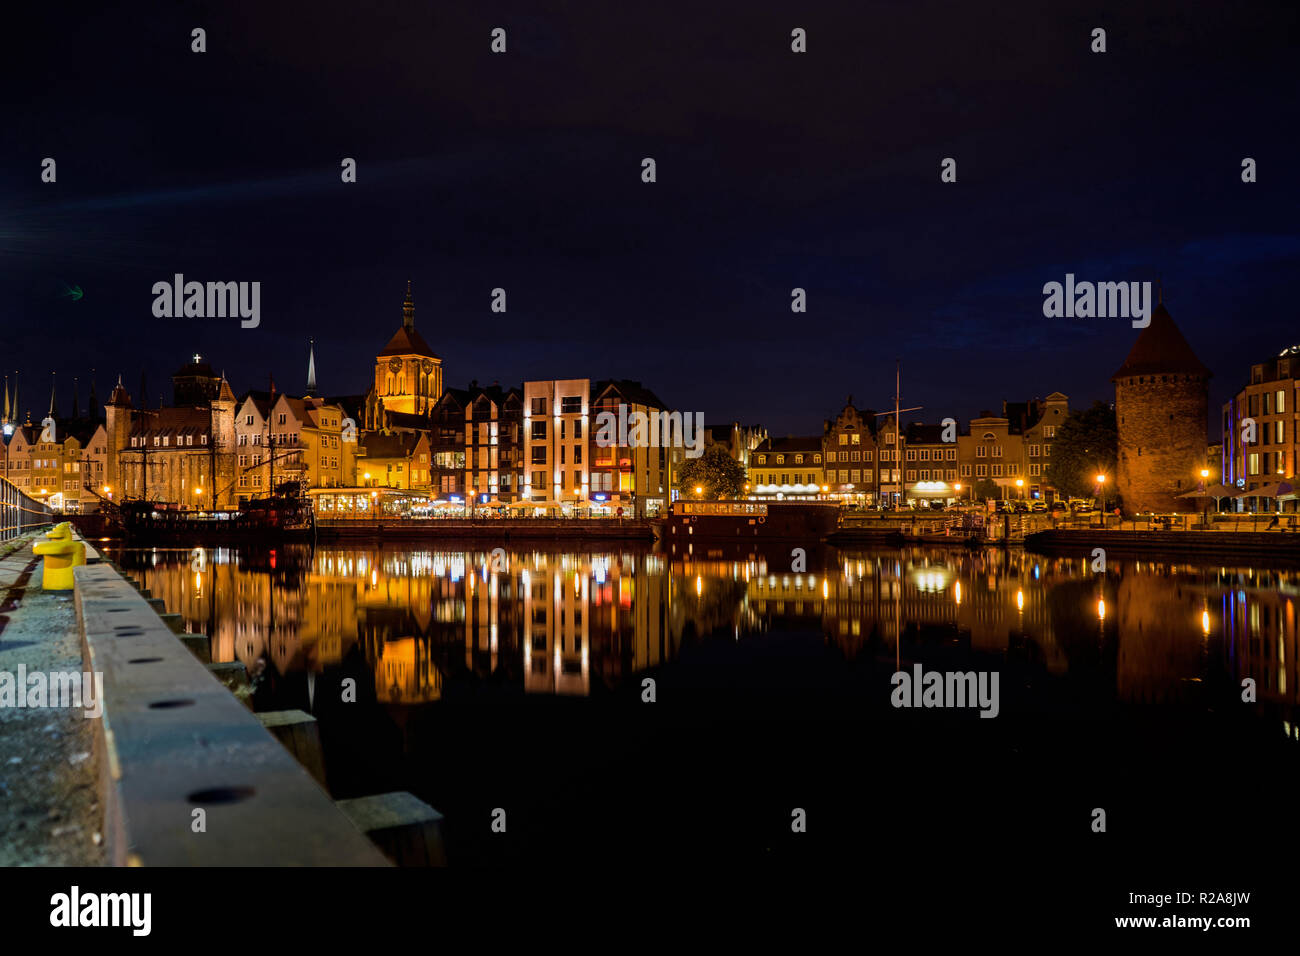 Night photograph of the canal waterfront of the city of Gdansk, Poland. Stock Photo